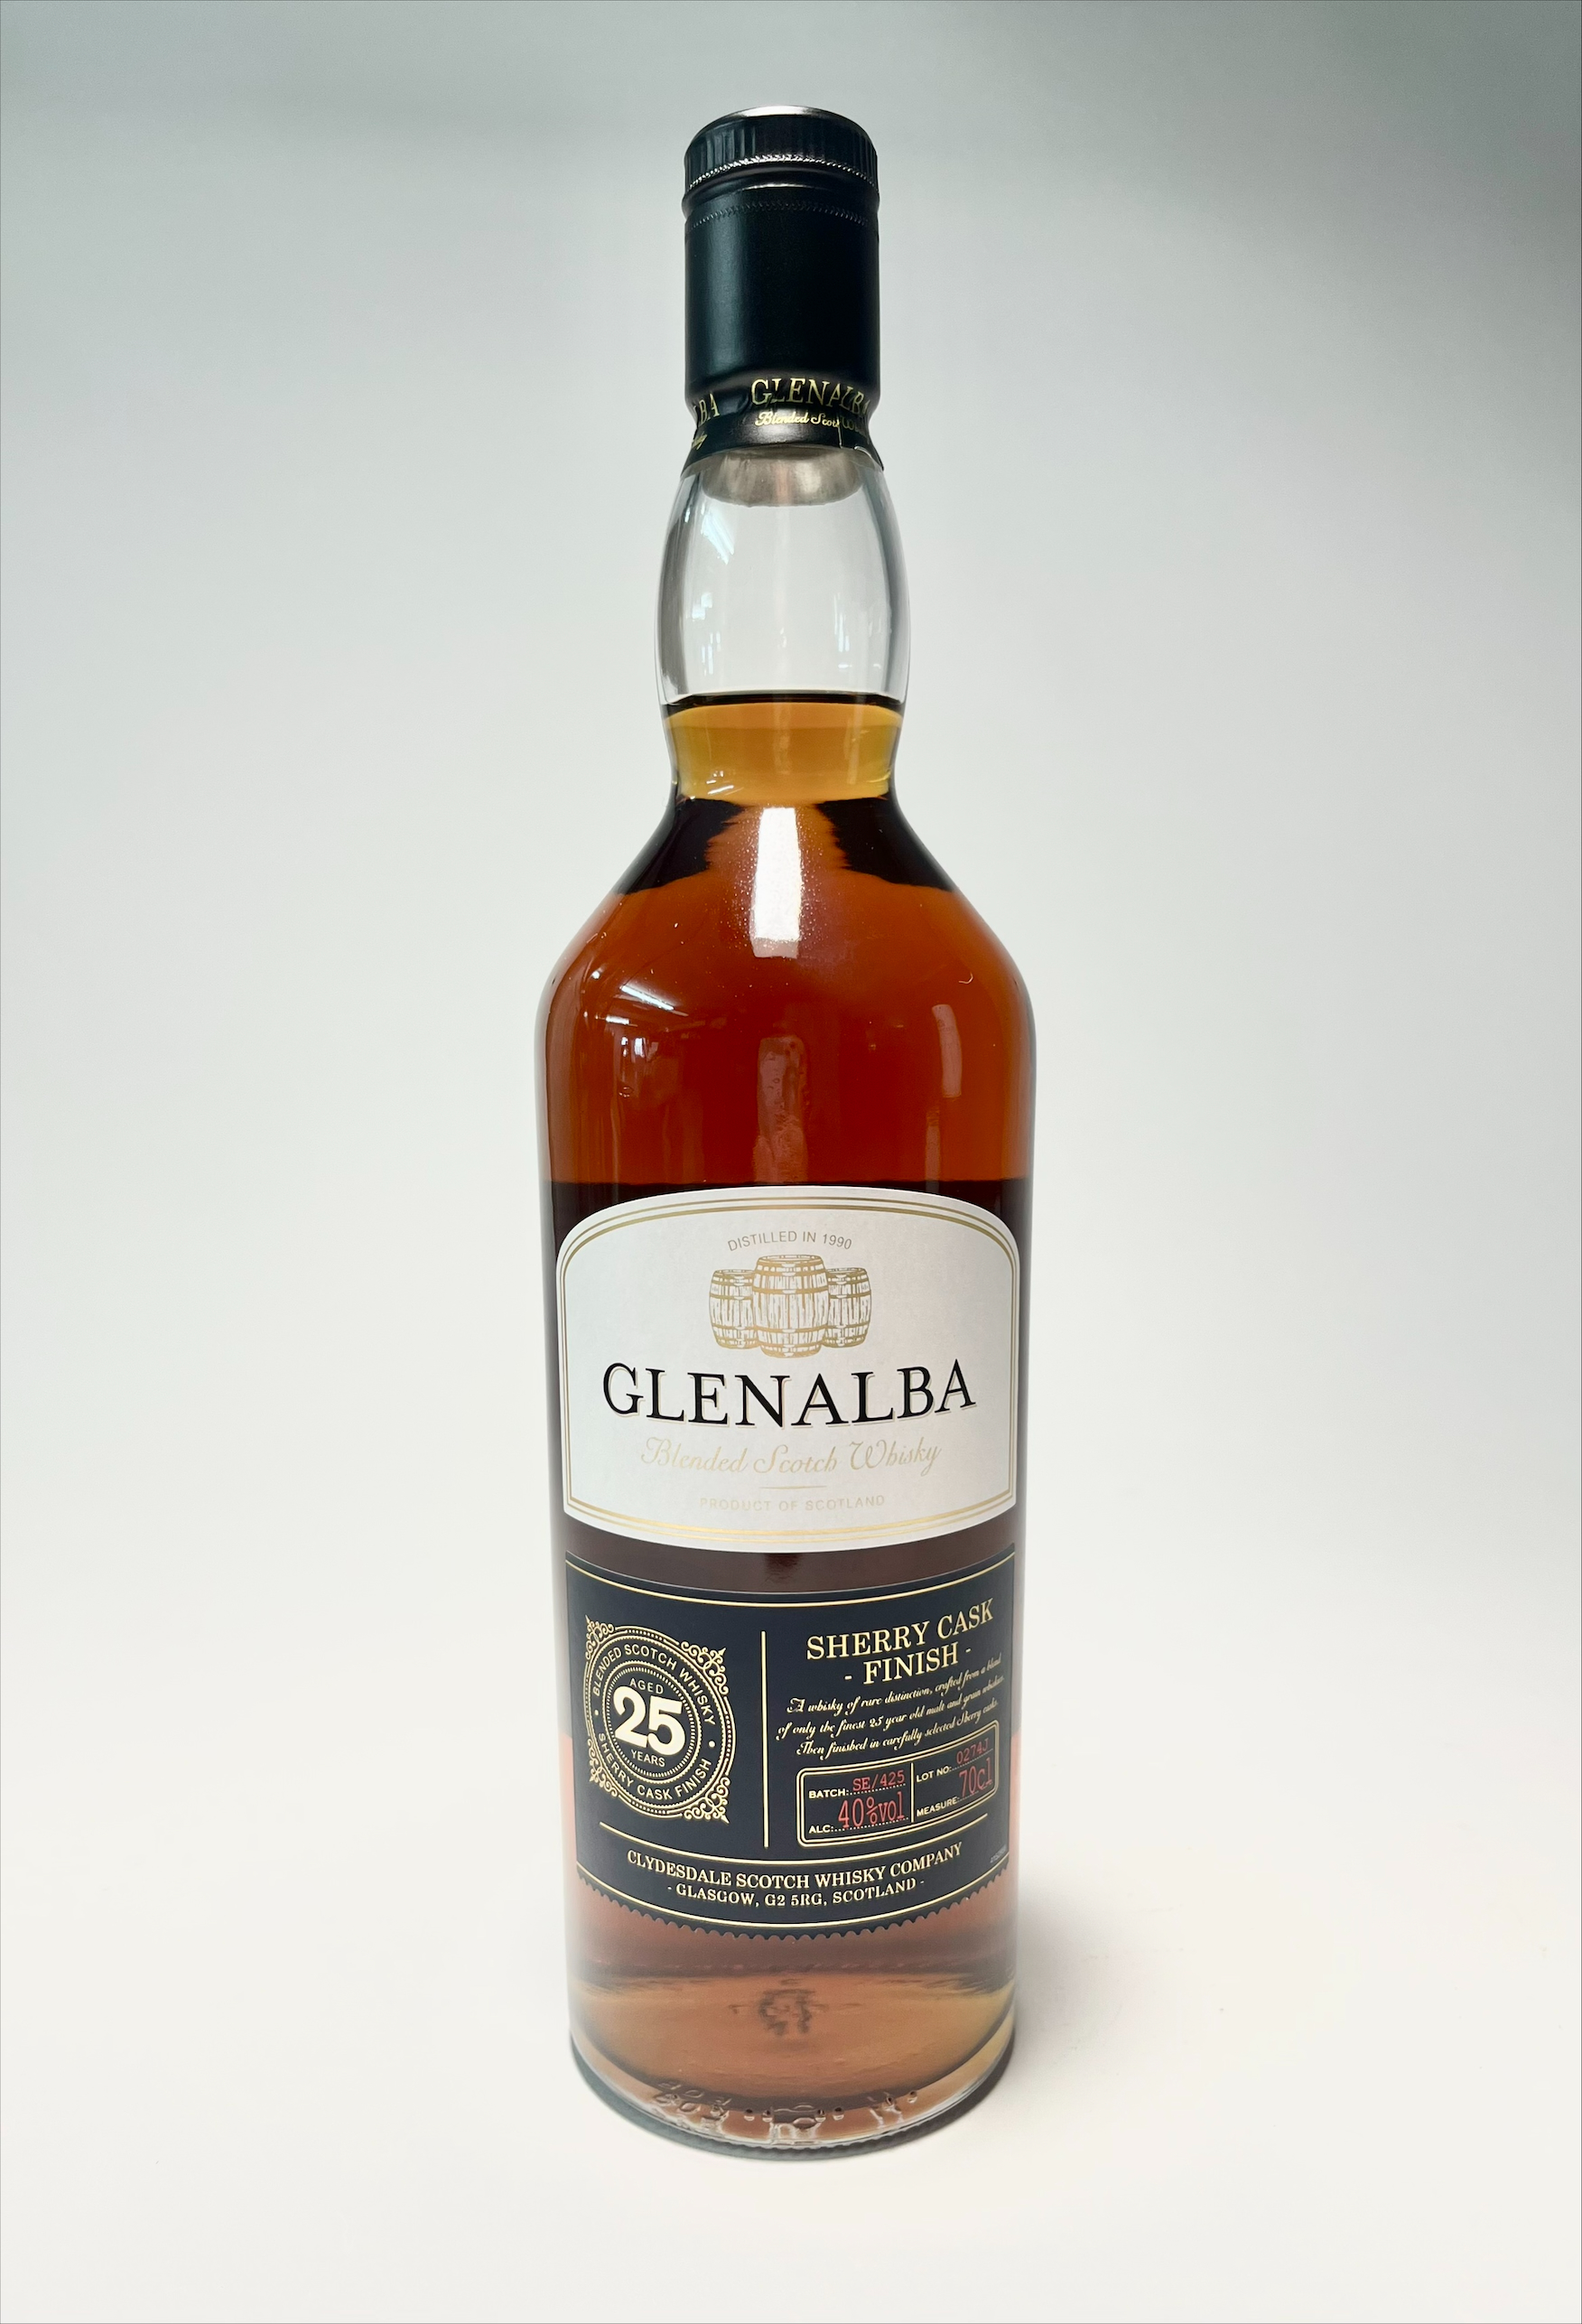 A bottle of Glenalba Blended Scotch Whisky, Sherry cask finish, aged 25 years, product of - Image 2 of 2